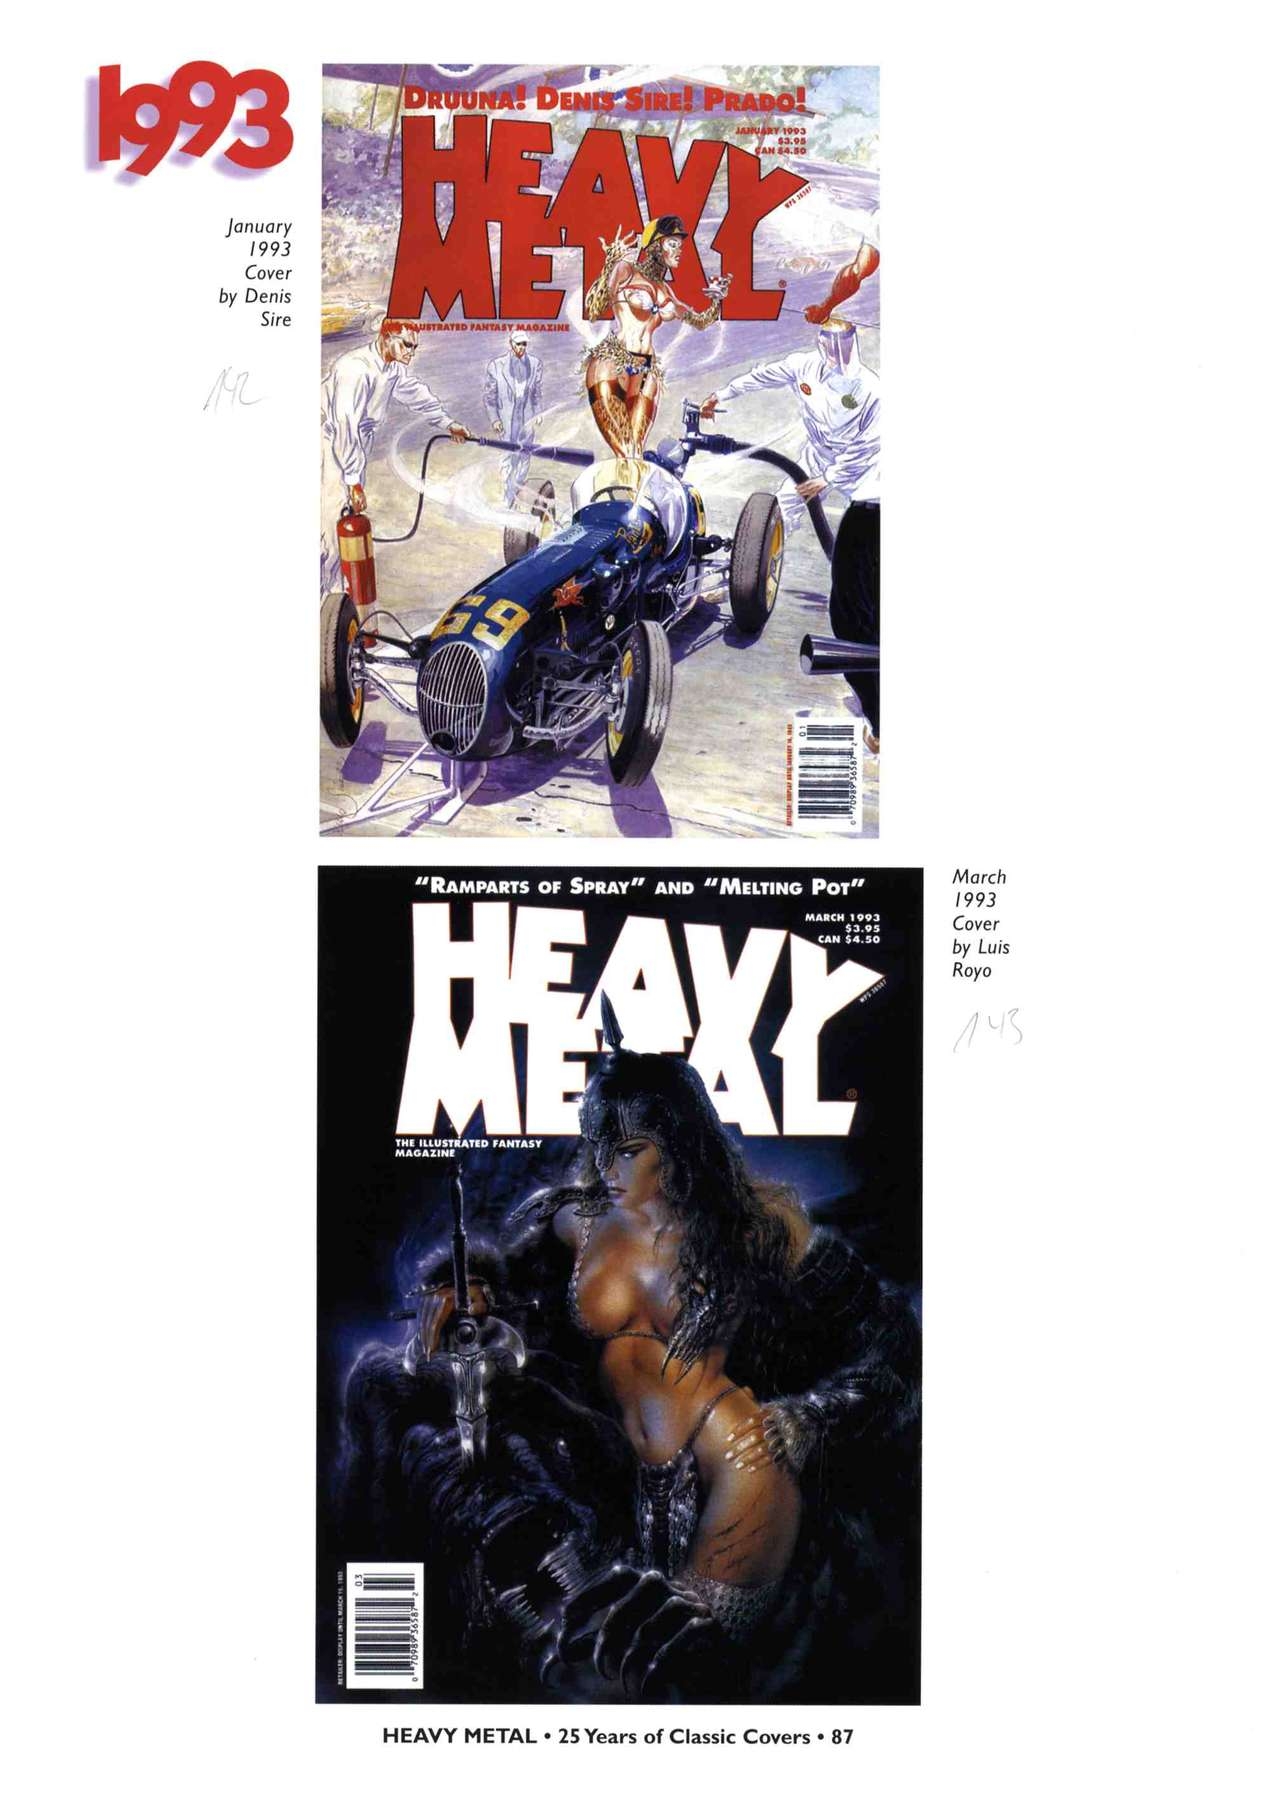 HEAVY METAL 25 Years of Classic Covers 92